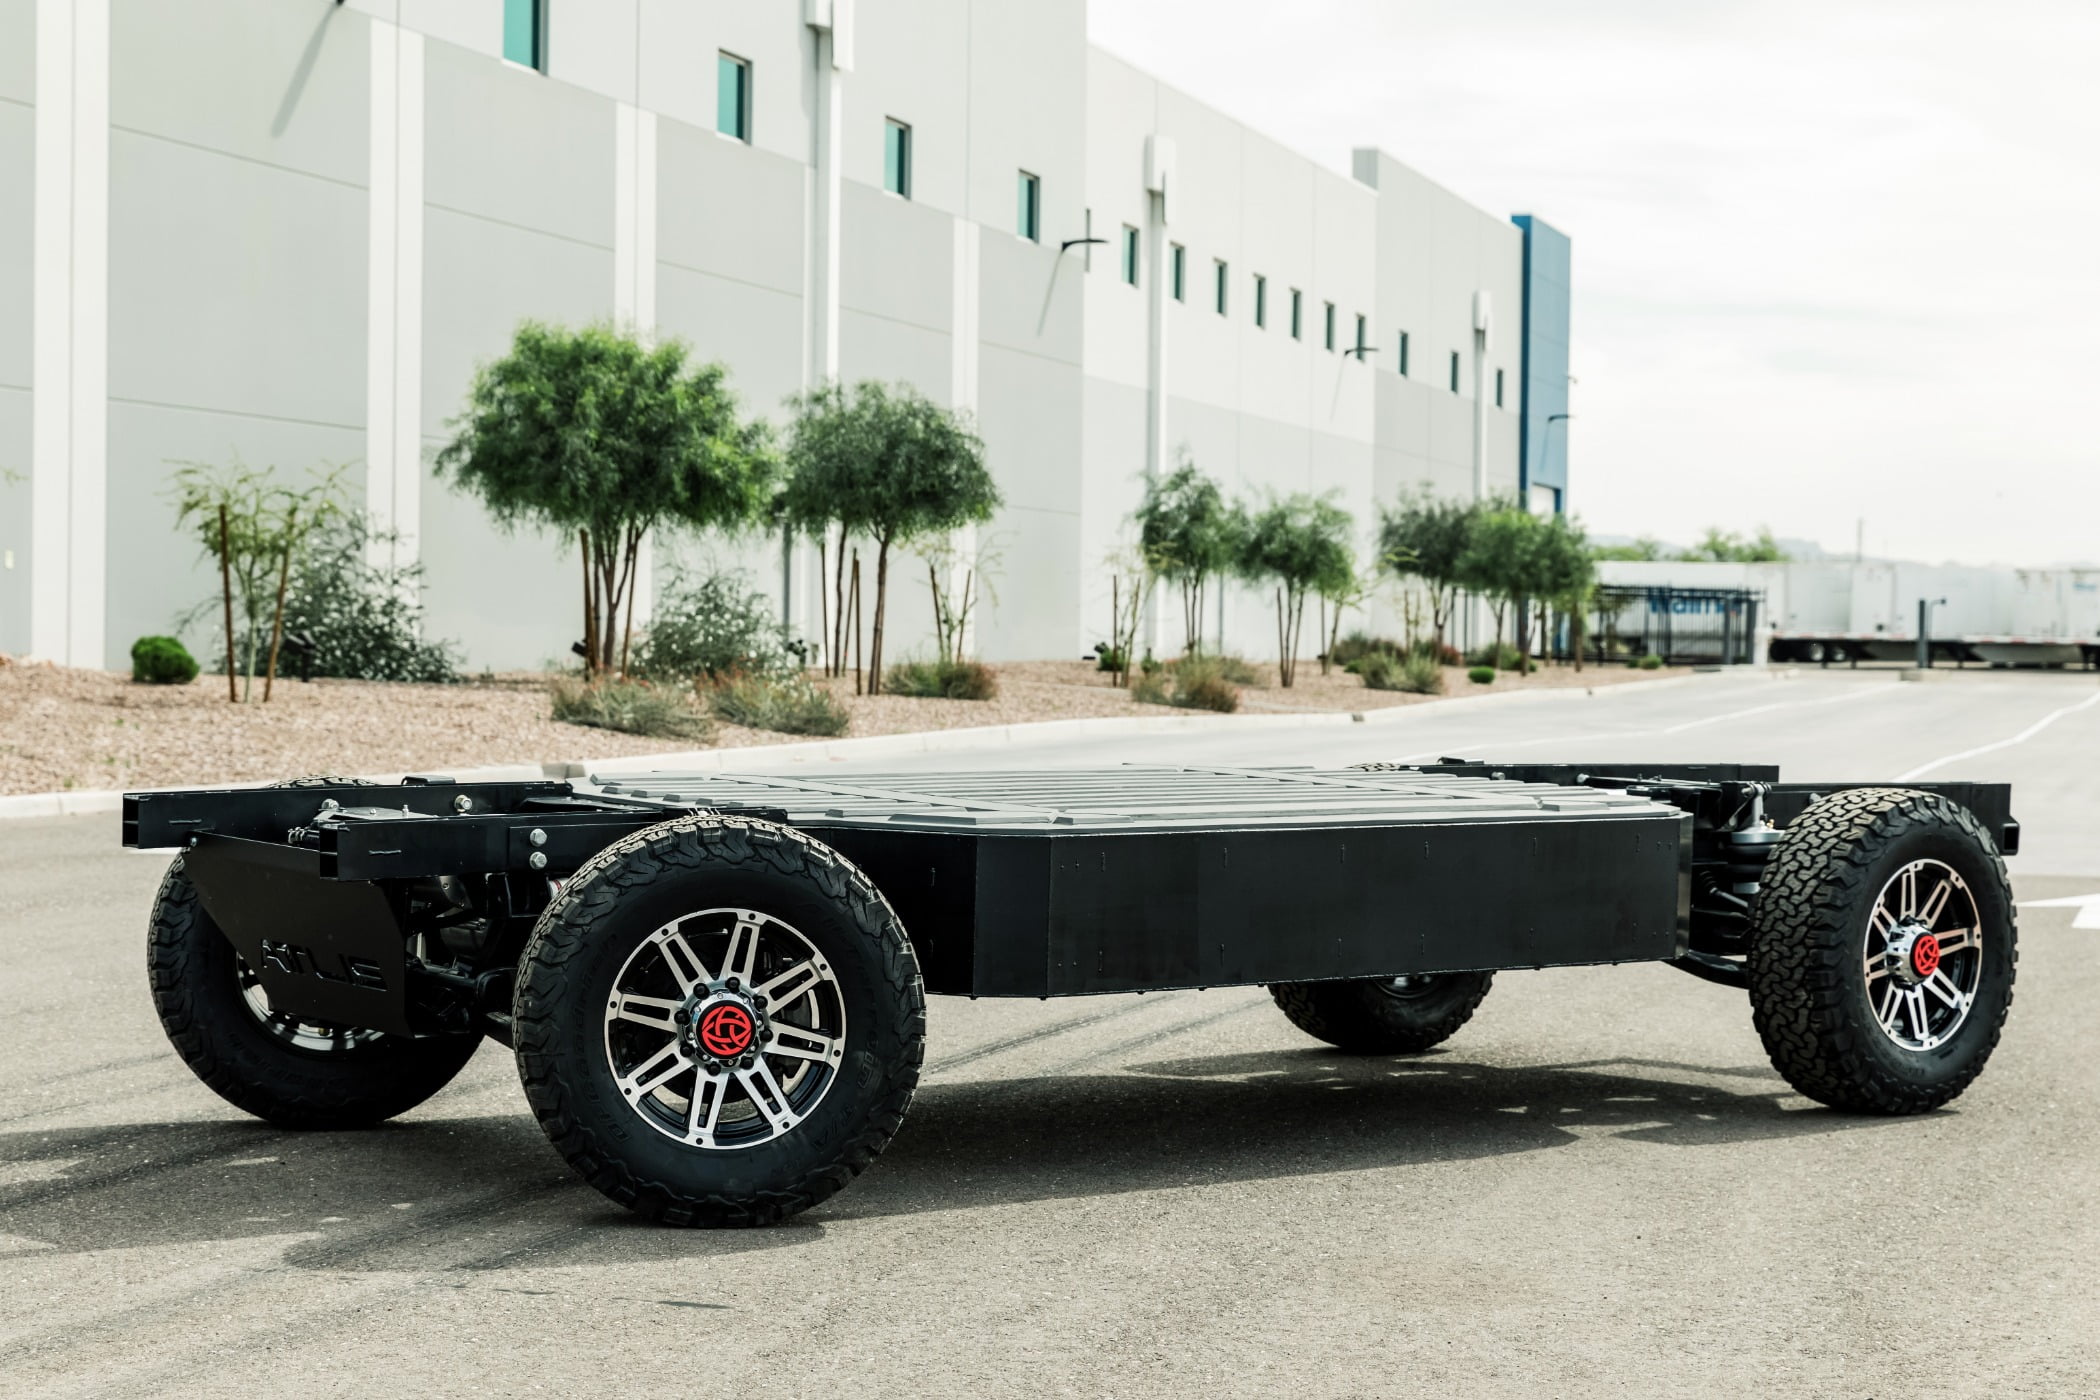 The XP platform contains brake systems, drive systems, suspension and steering systems, in addition to the battery pack and the frame structure.